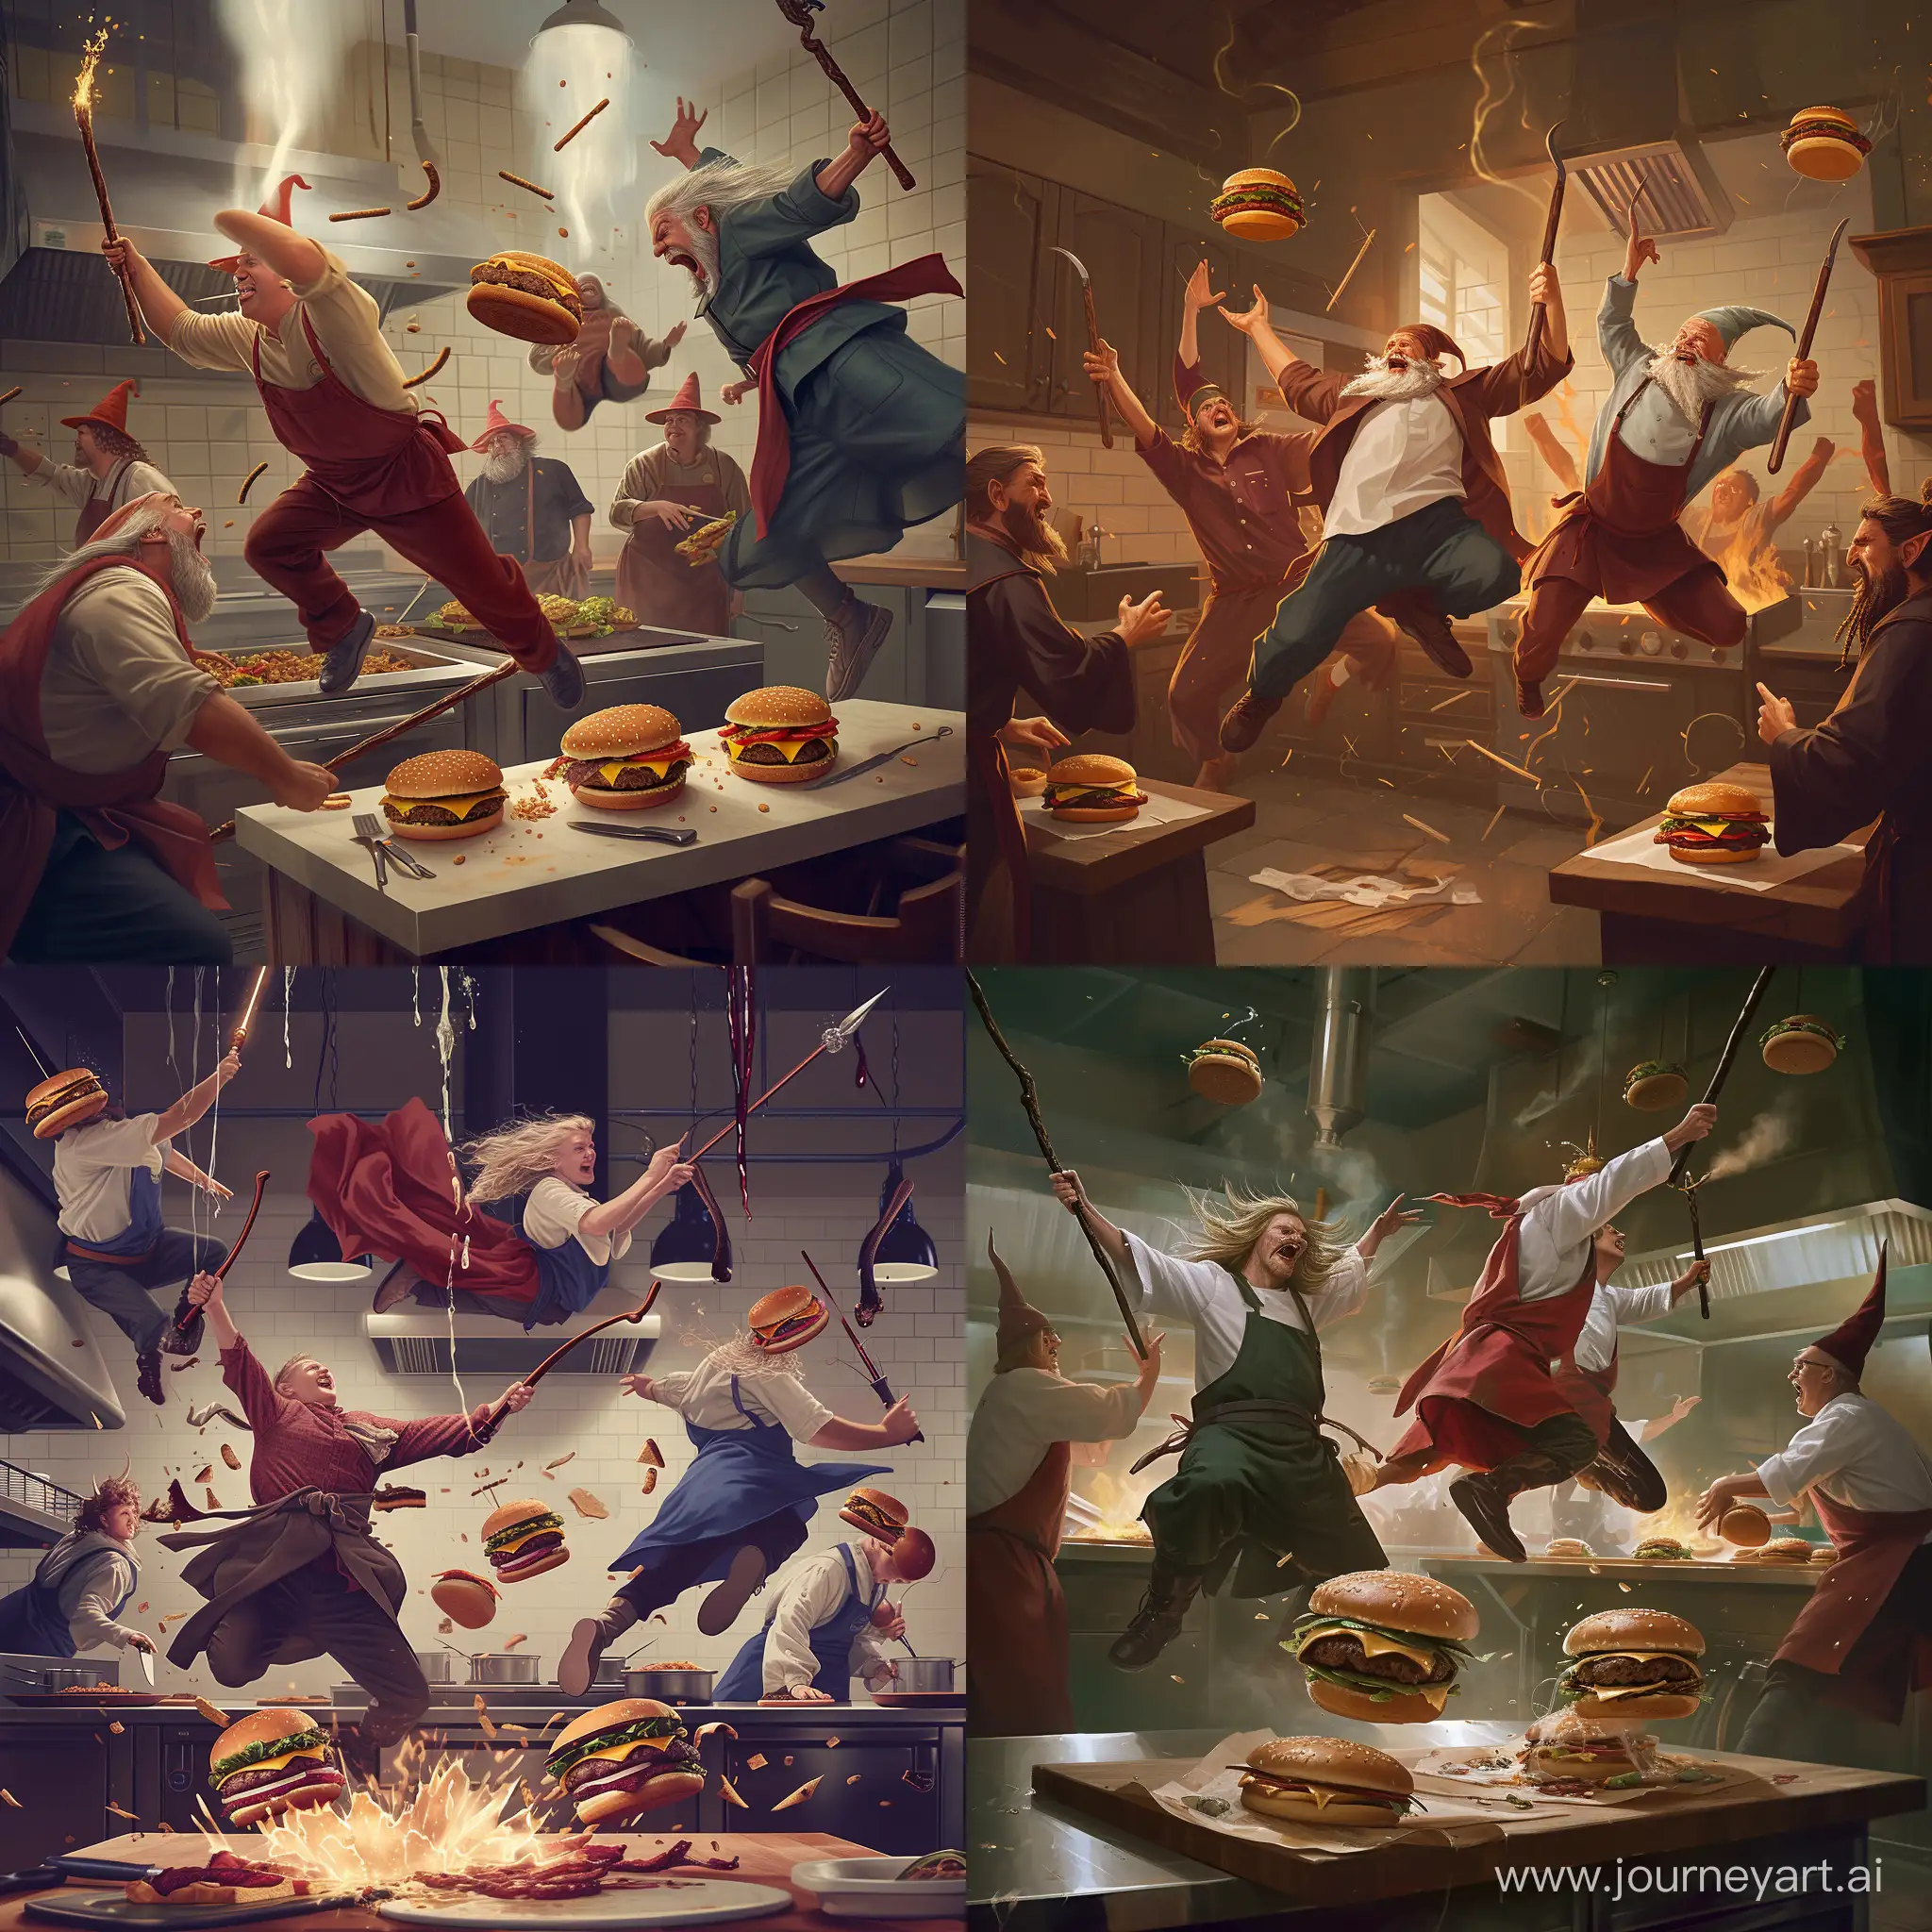 Wizards-Cast-Magical-Chaos-in-Fast-Food-Kitchen